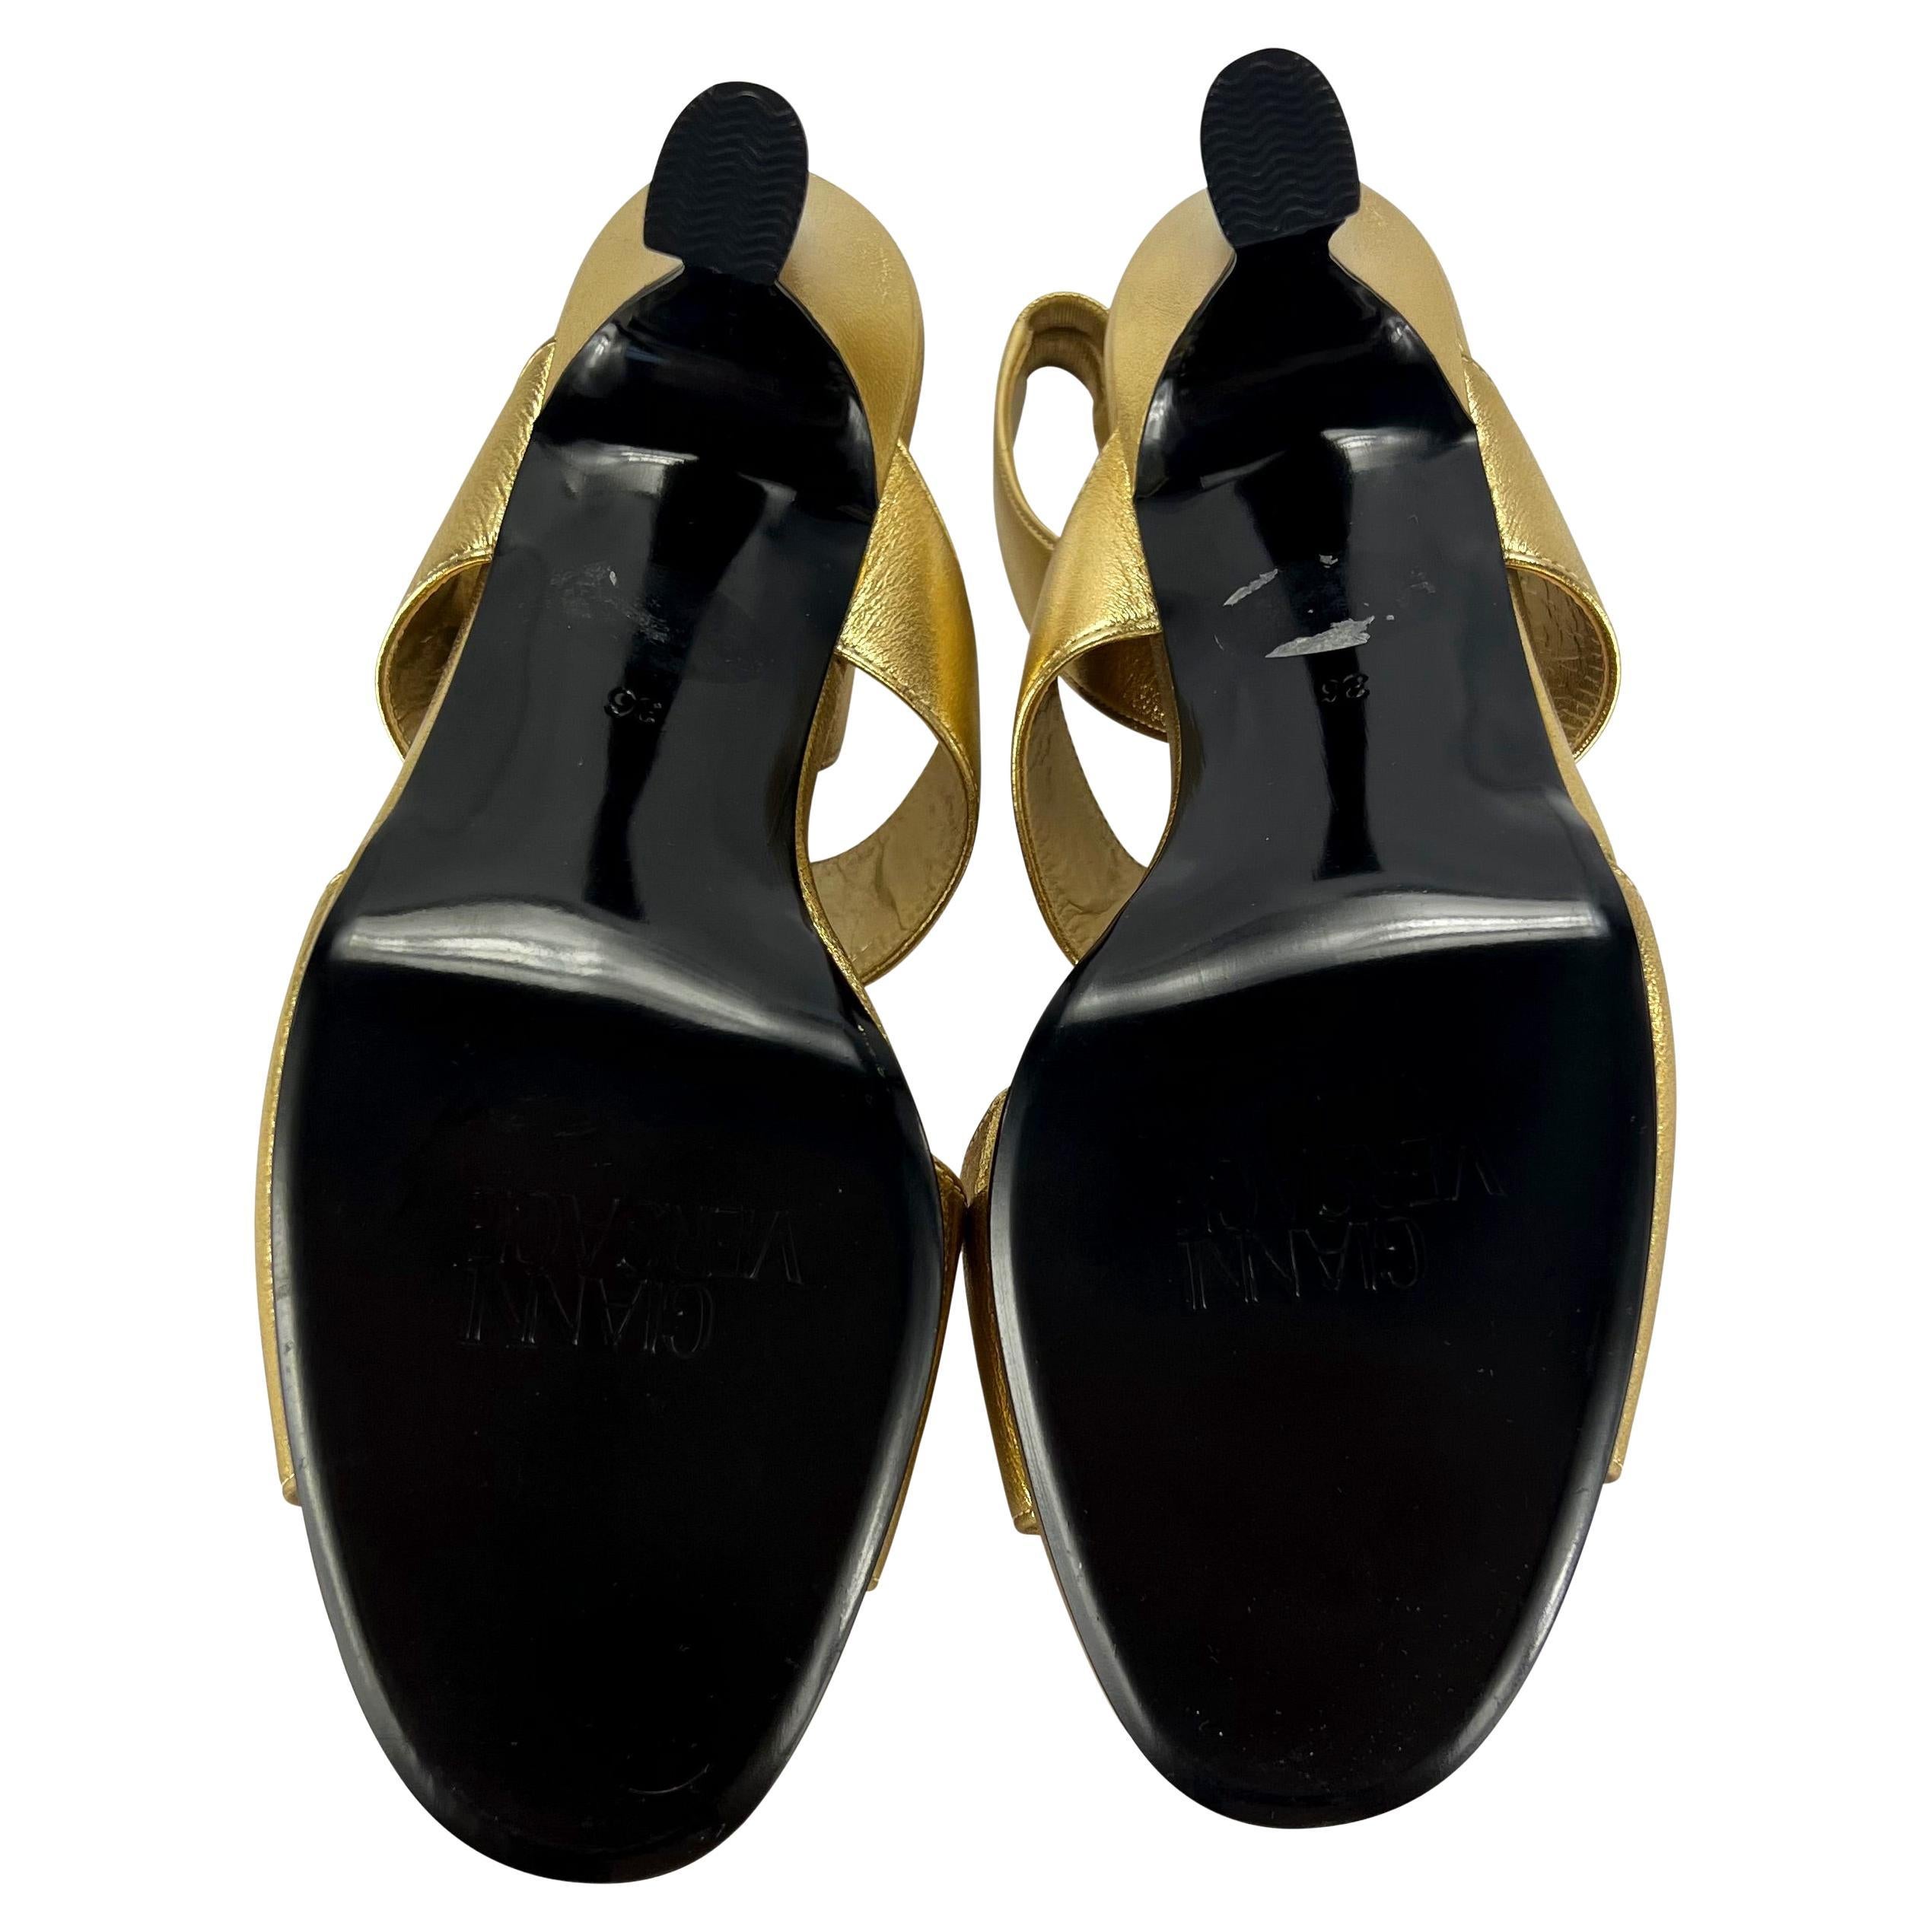 Chaussures à talons or Mare Gianni Versace S/S 1992, Taille 36 Neuf - En vente à West Hollywood, CA